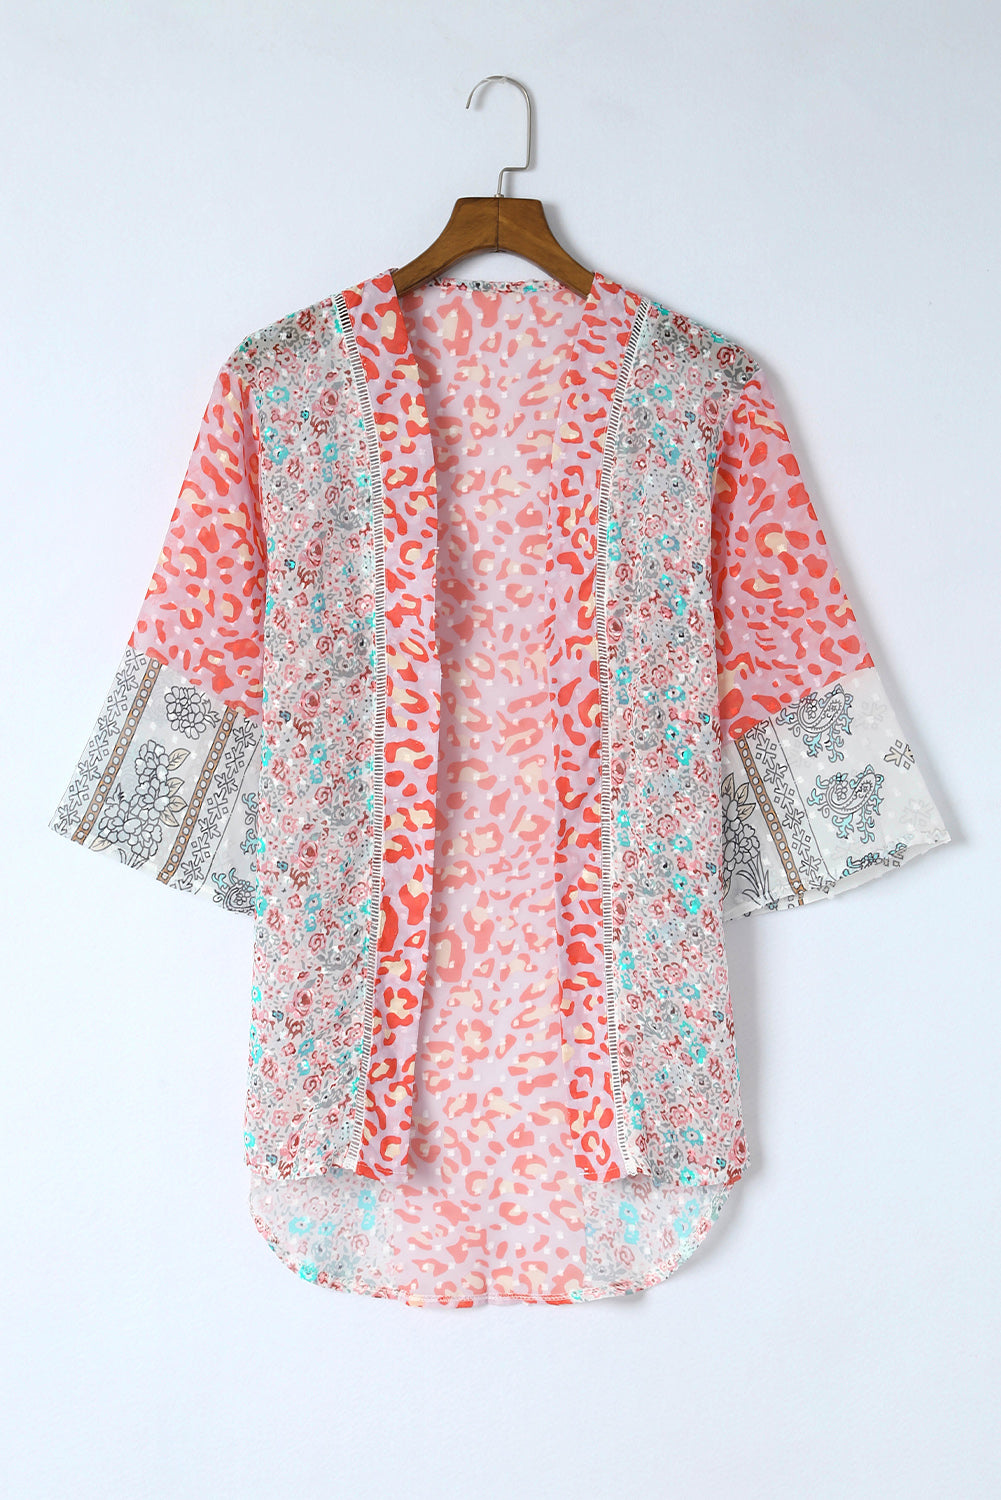 Emily Patchwork Printed Open Front Sheer Cardigan